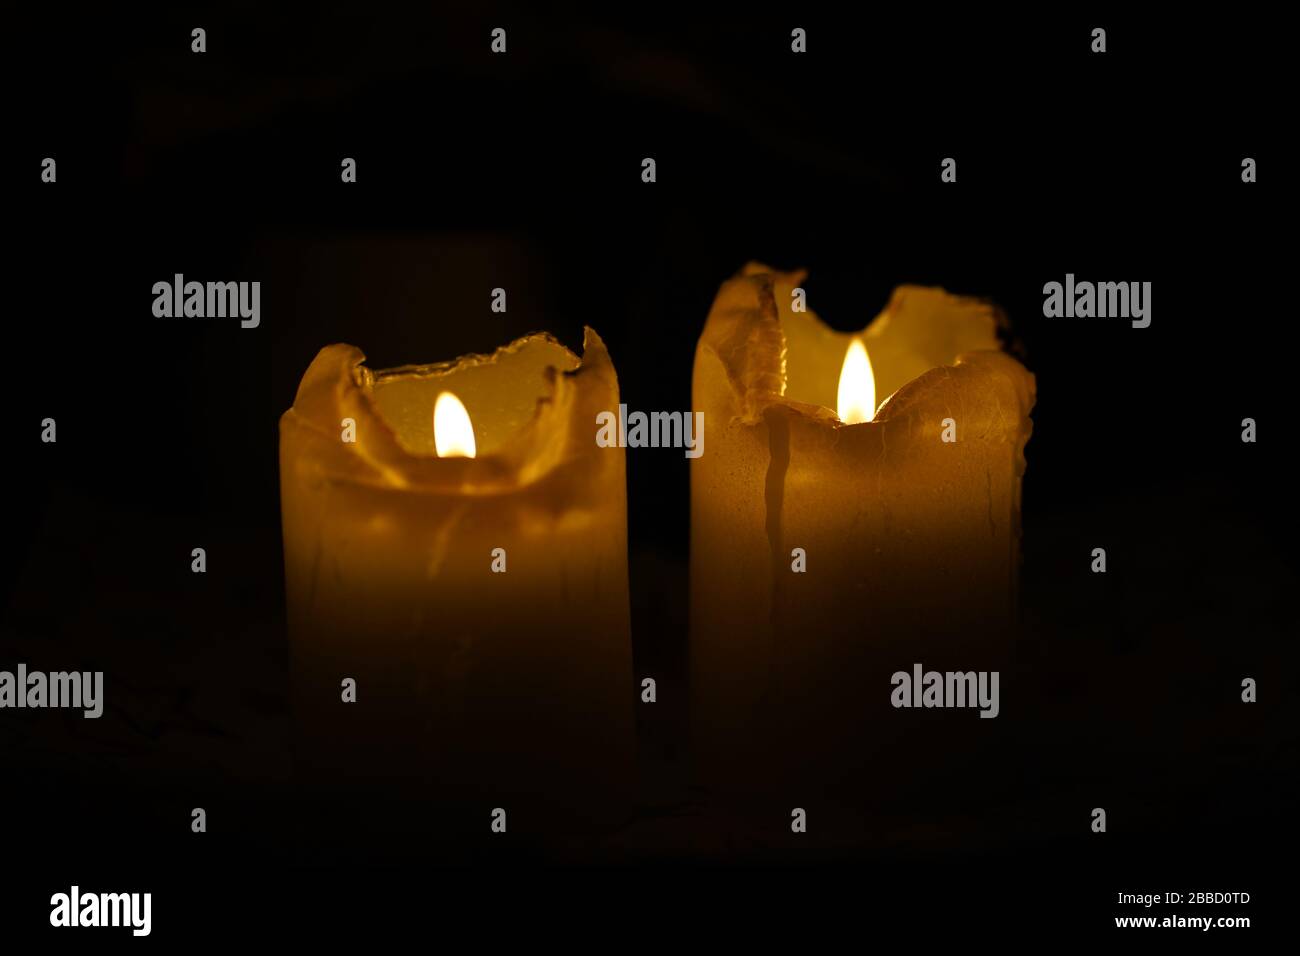 Embracing the serenity of the night, two candles flicker in the darkness, casting a gentle glow that illuminates the silent beauty of the moment. Stock Photo